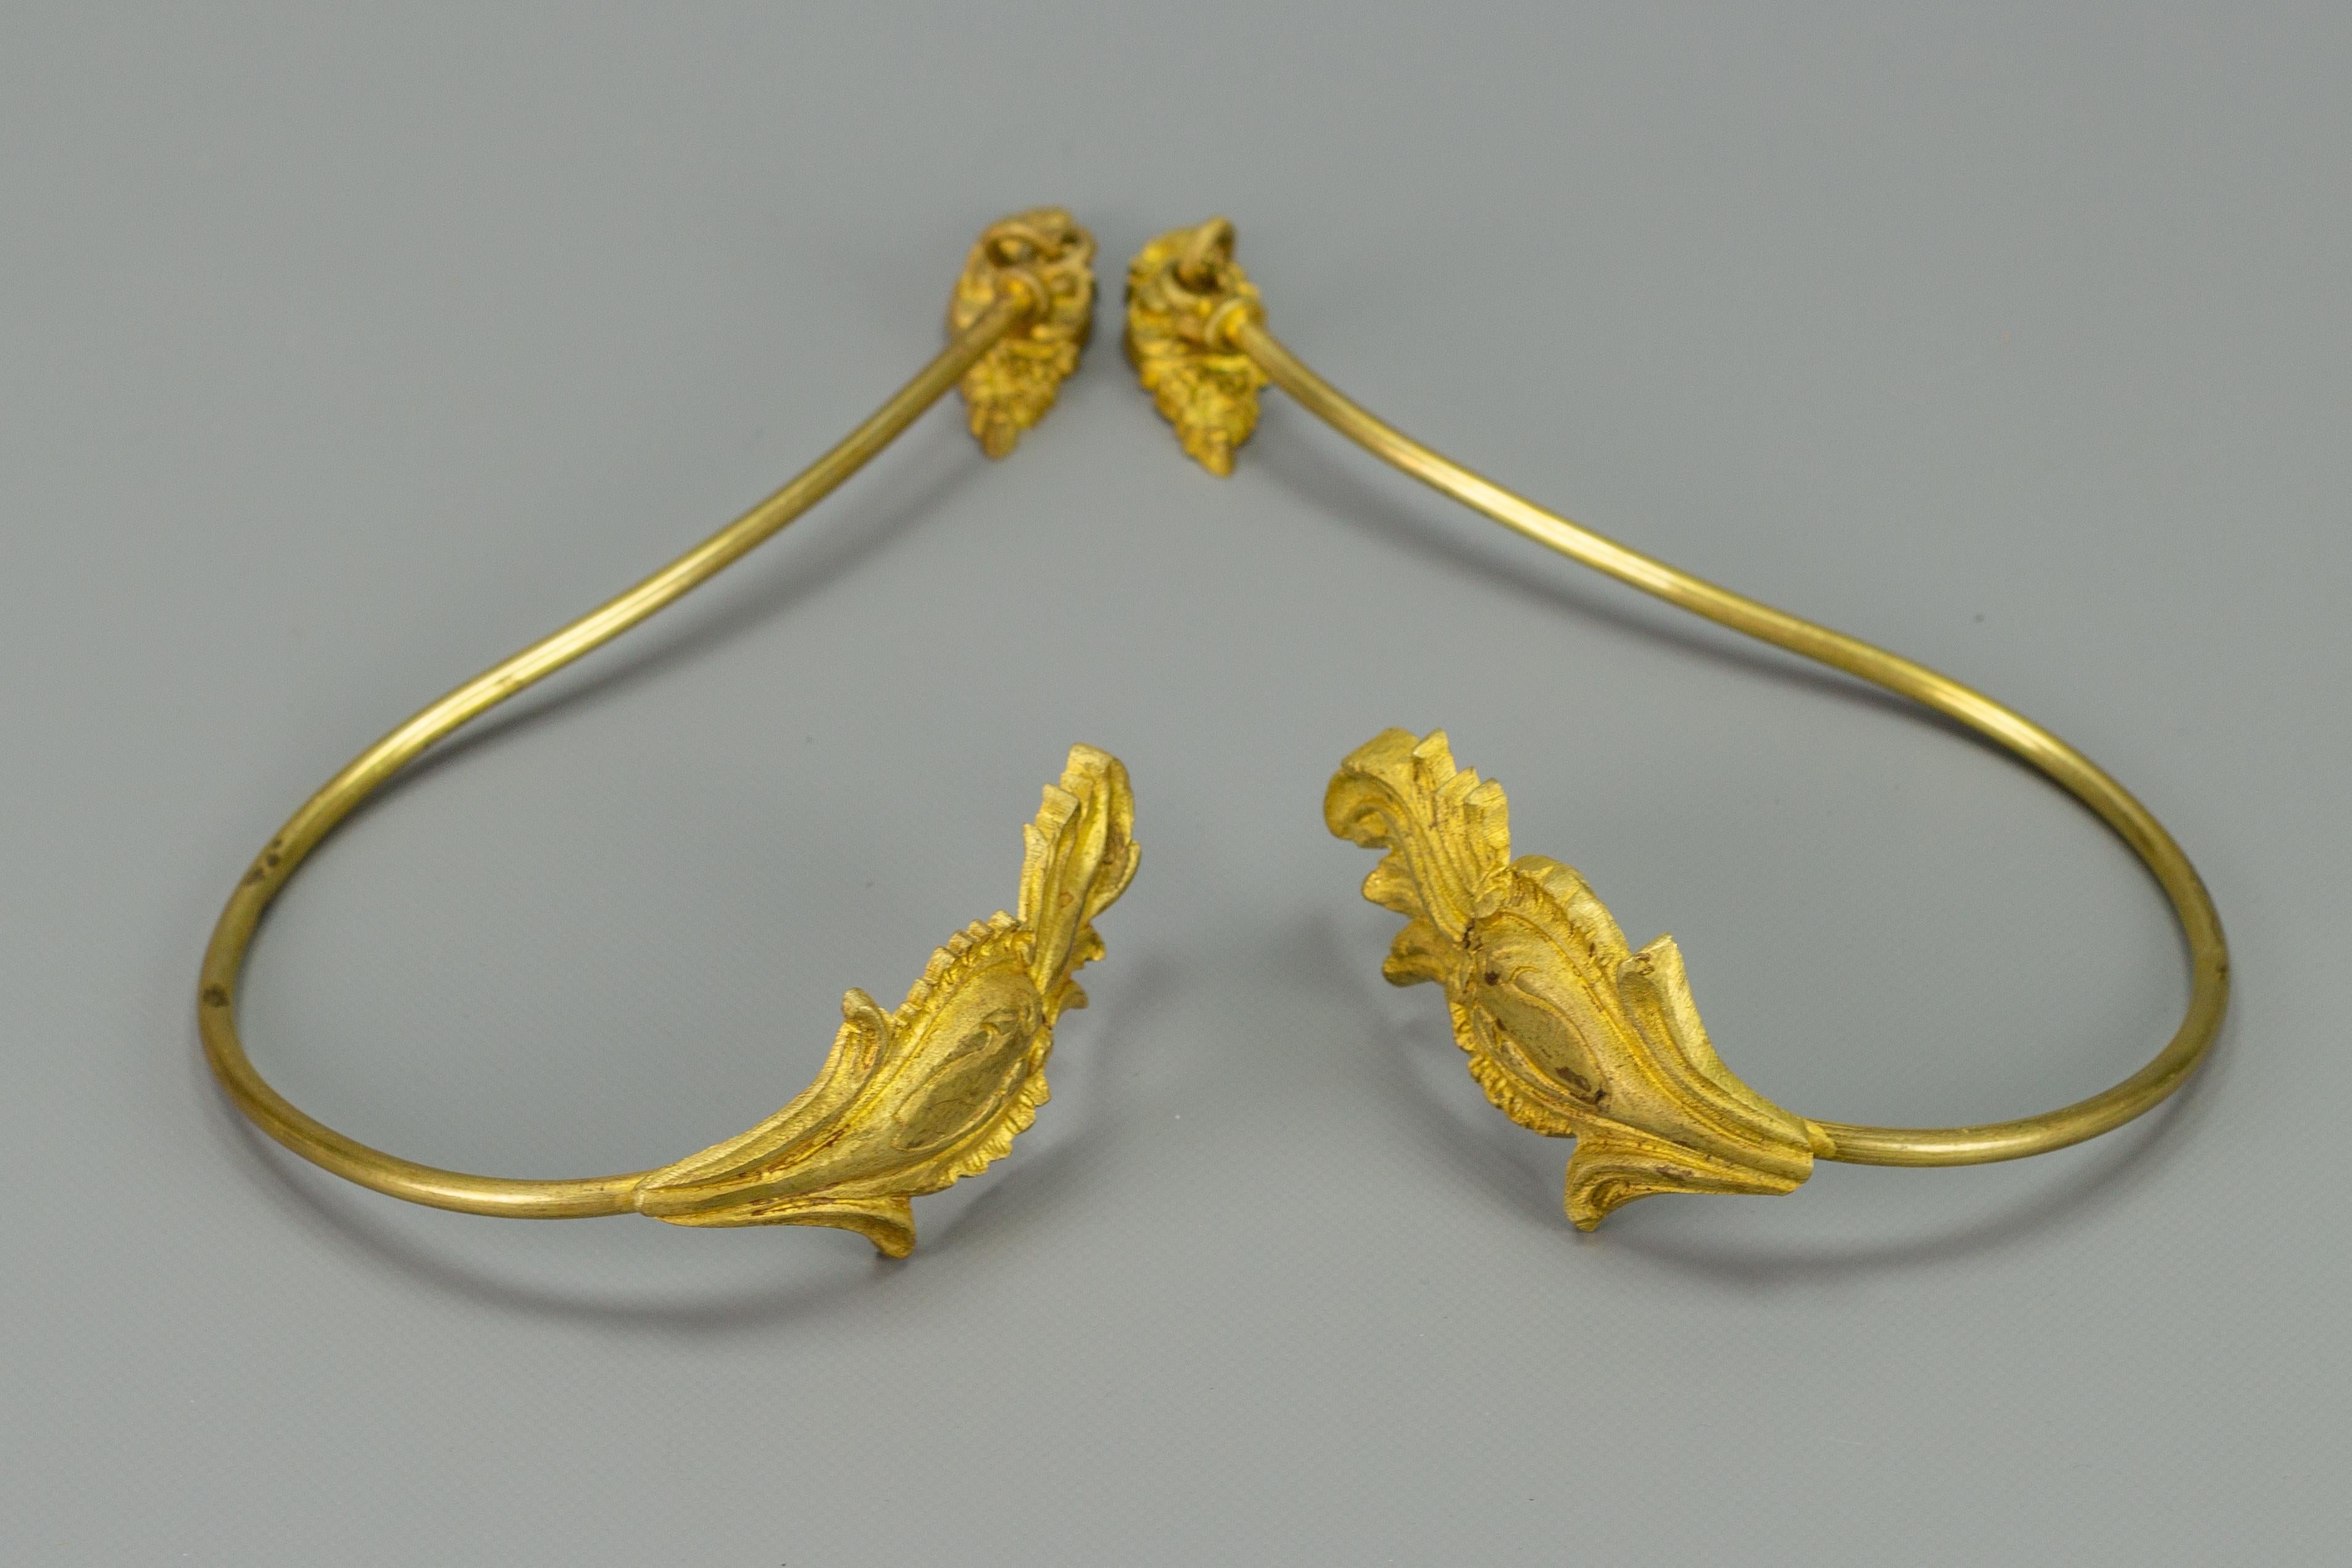 Beautiful pair of gilt bronze and brass curtain holders or tie-backs with very nice Louis XVI style decorations. Each marked with T and numbered. France, circa 1925.
Dimensions: Height 28 cm / 11.02 in; width 6 cm / 2.36 in; depth 13 cm / 5.11